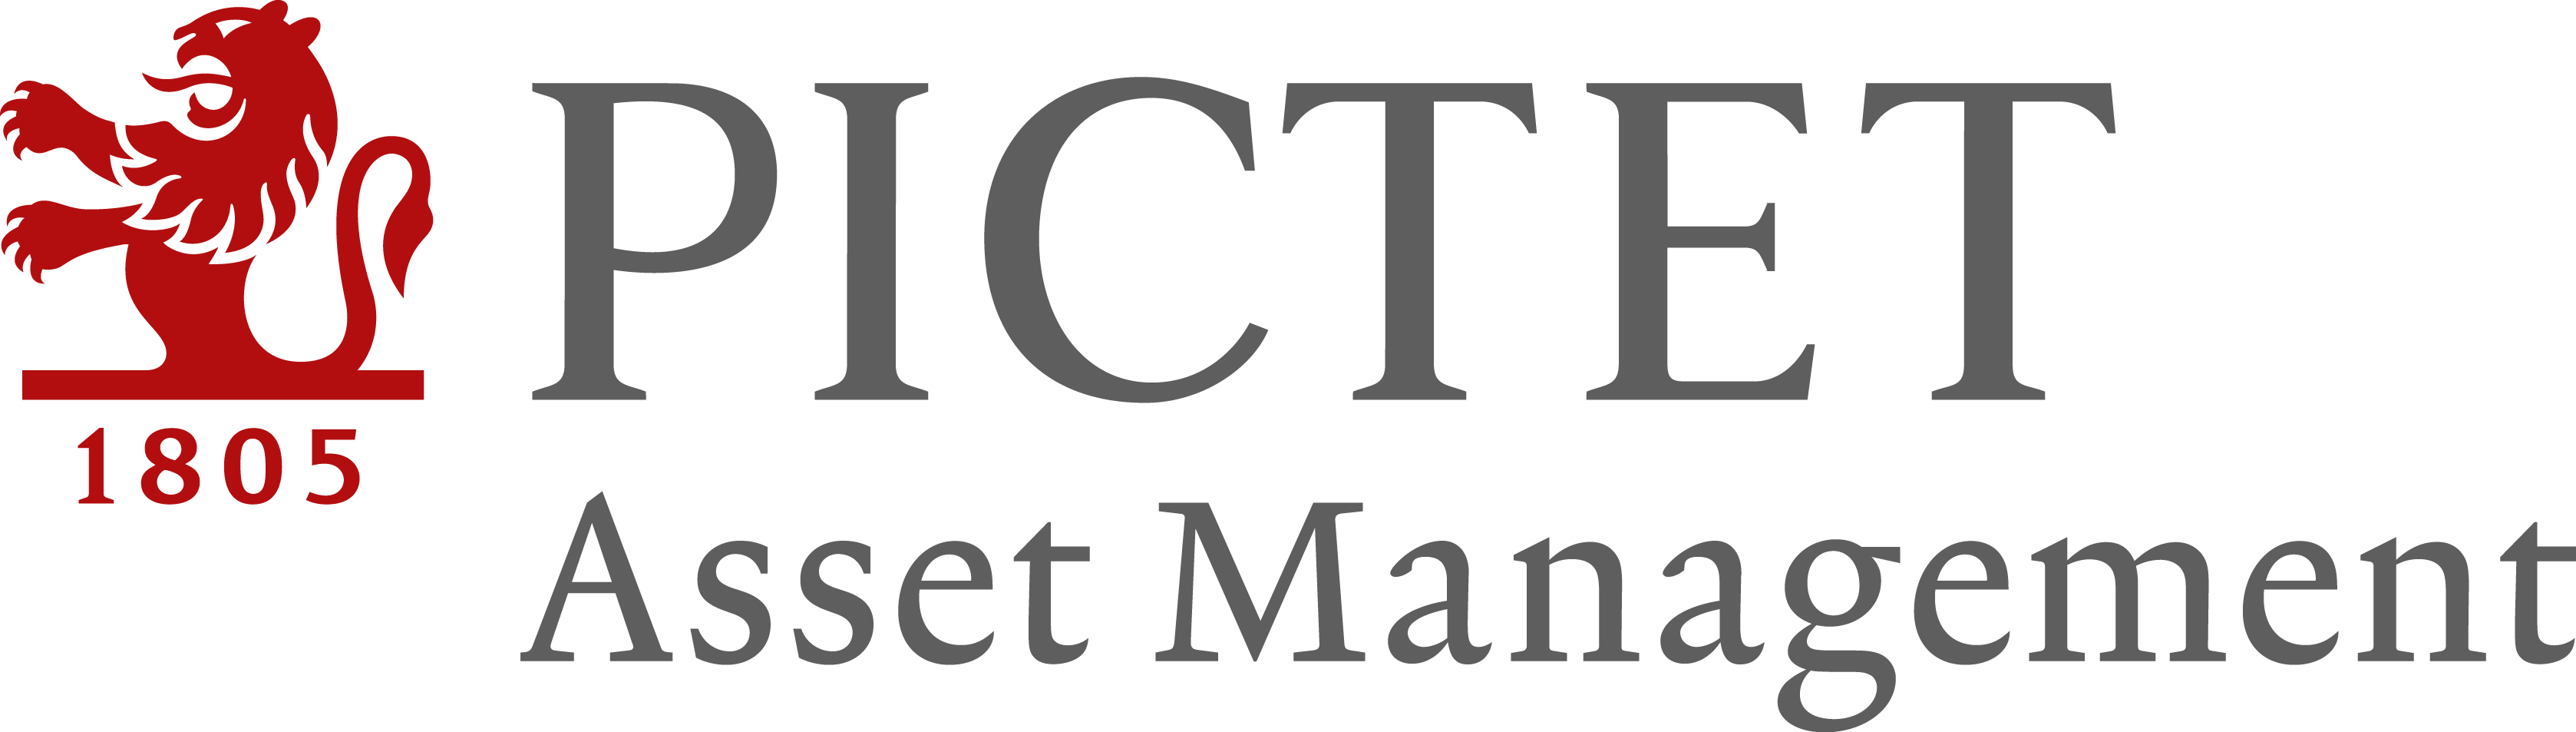 the pictet group